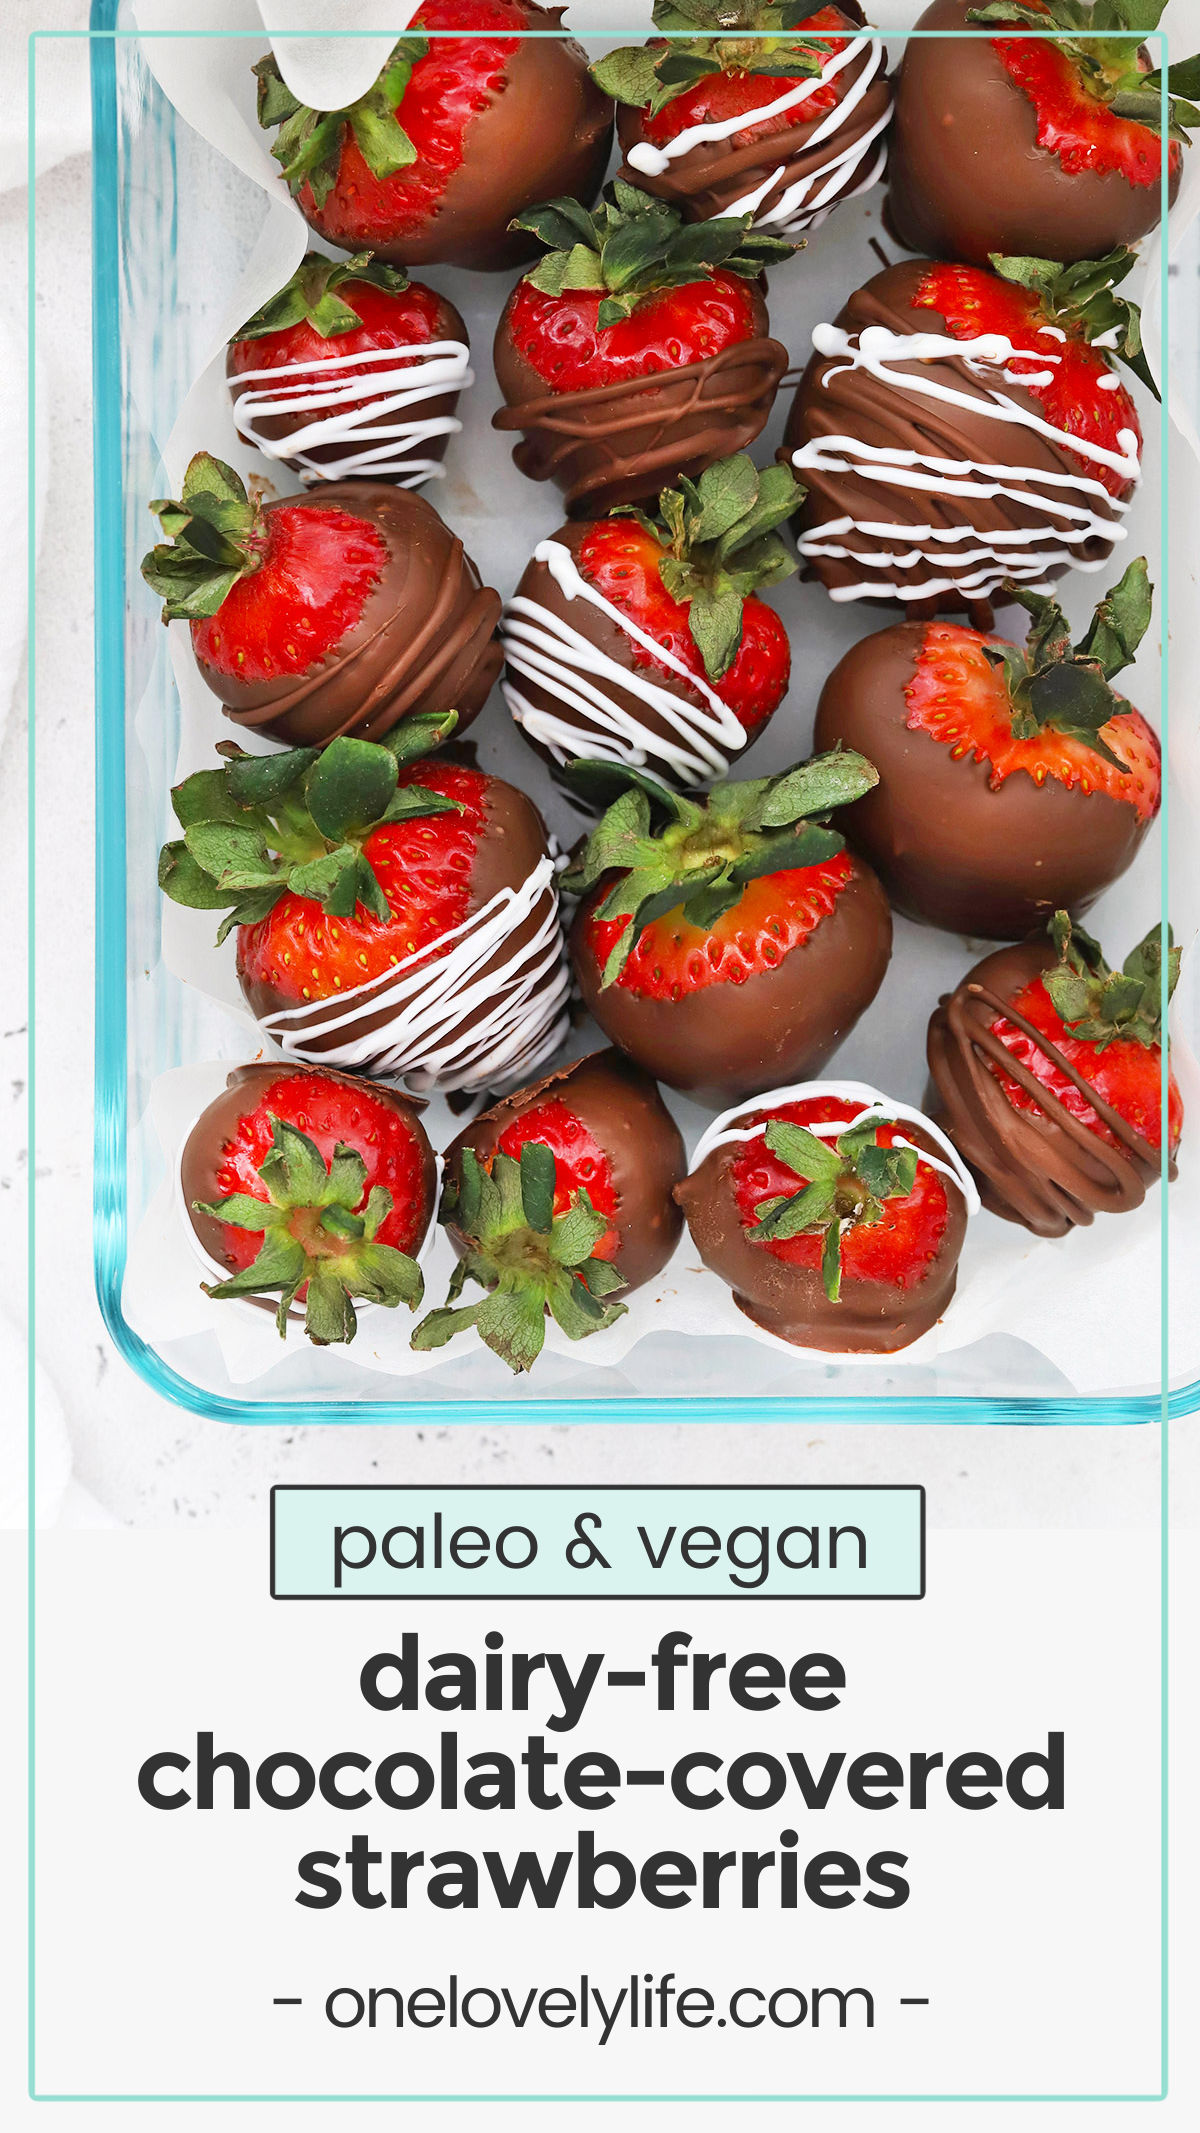 How to Make Chocolate Covered Strawberries - Here is everything you need to know to make this classic dessert! I'll even show you how to make them dairy-free, vegan, and paleo-approved! // Paleo Chocolate covered strawberries // dairy-free chocolate-covered strawberries // vegan chocolate covered strawberries // valentines day dessert // healthy chocolate covered strawberries // valentine's day dessert //